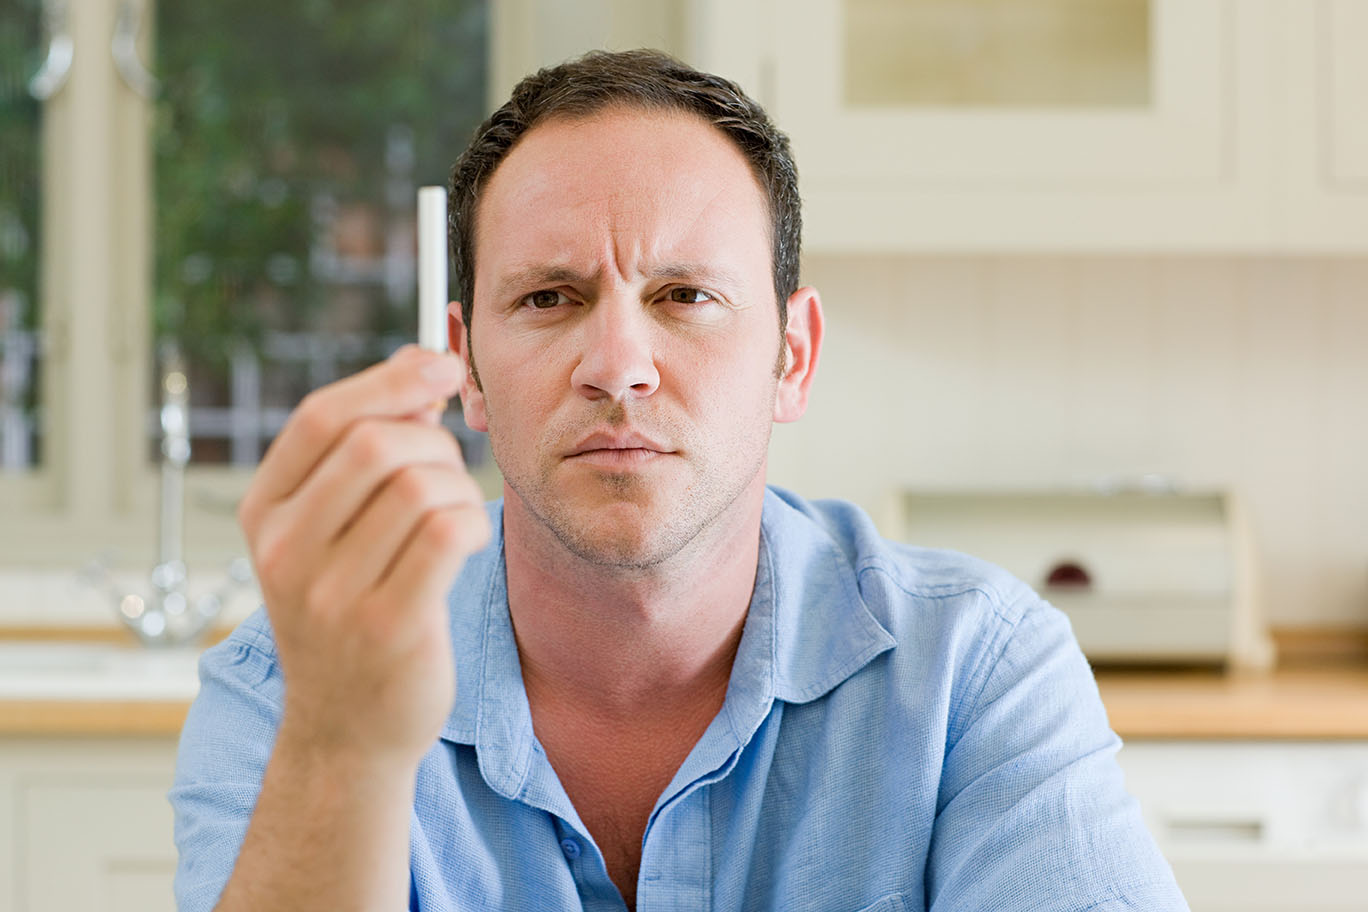 Man looking at cigarette